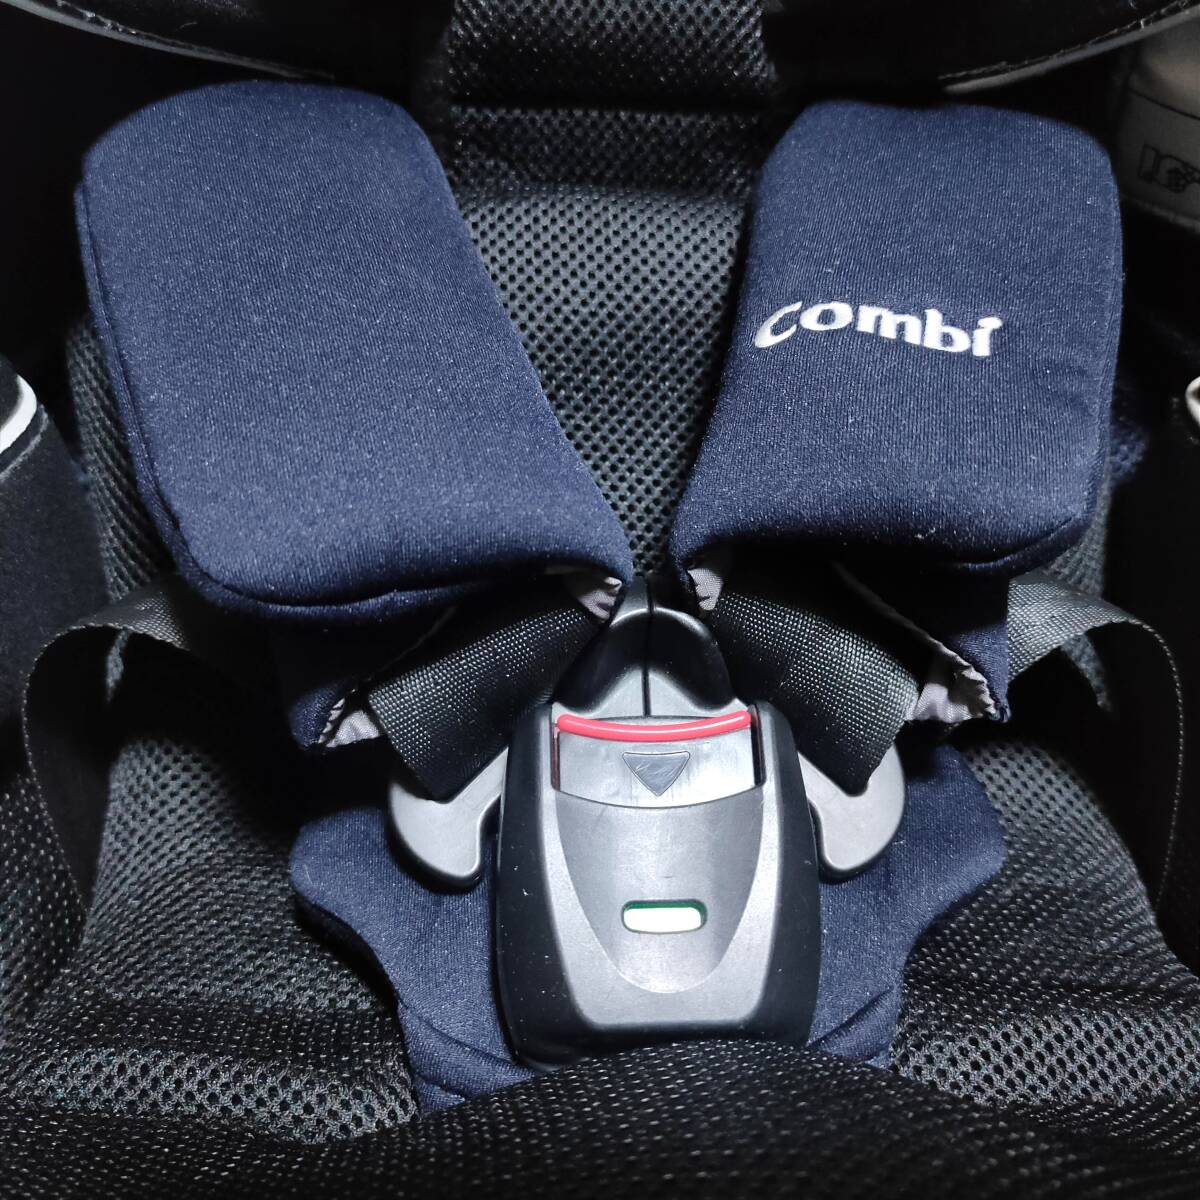 [ including carriage ] combination beautiful kru Move Smart ISOFIXeg shock child seat newborn baby ~ 360° rotation Turn cleaning settled 